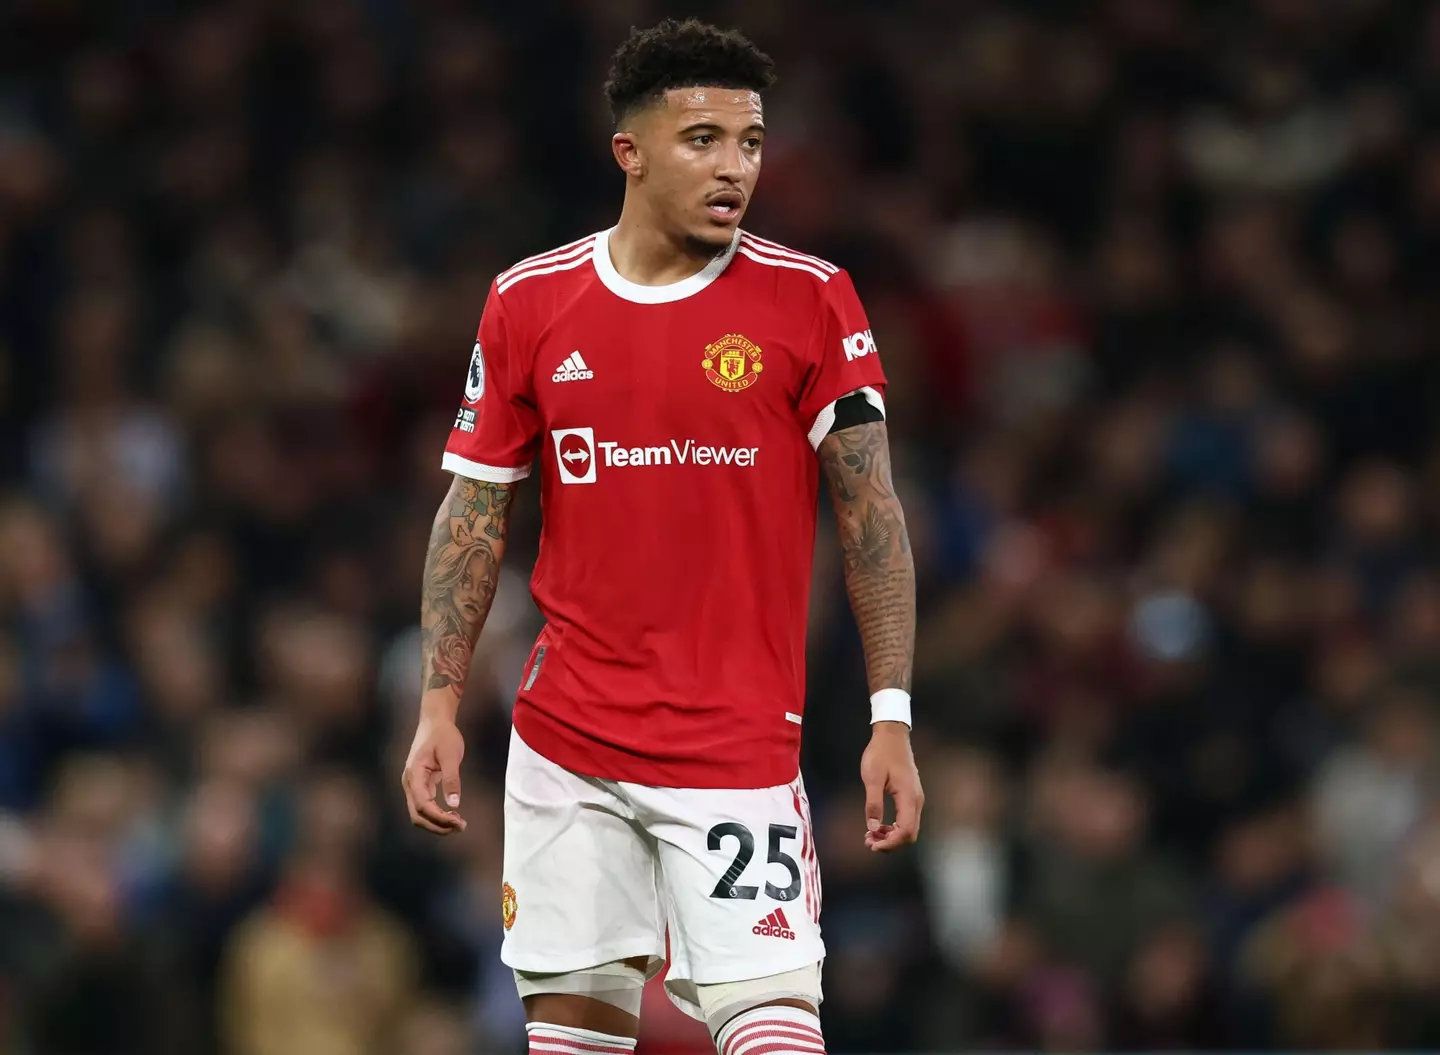 Jadon Sancho has had a tough start to his Manchester United career. Image